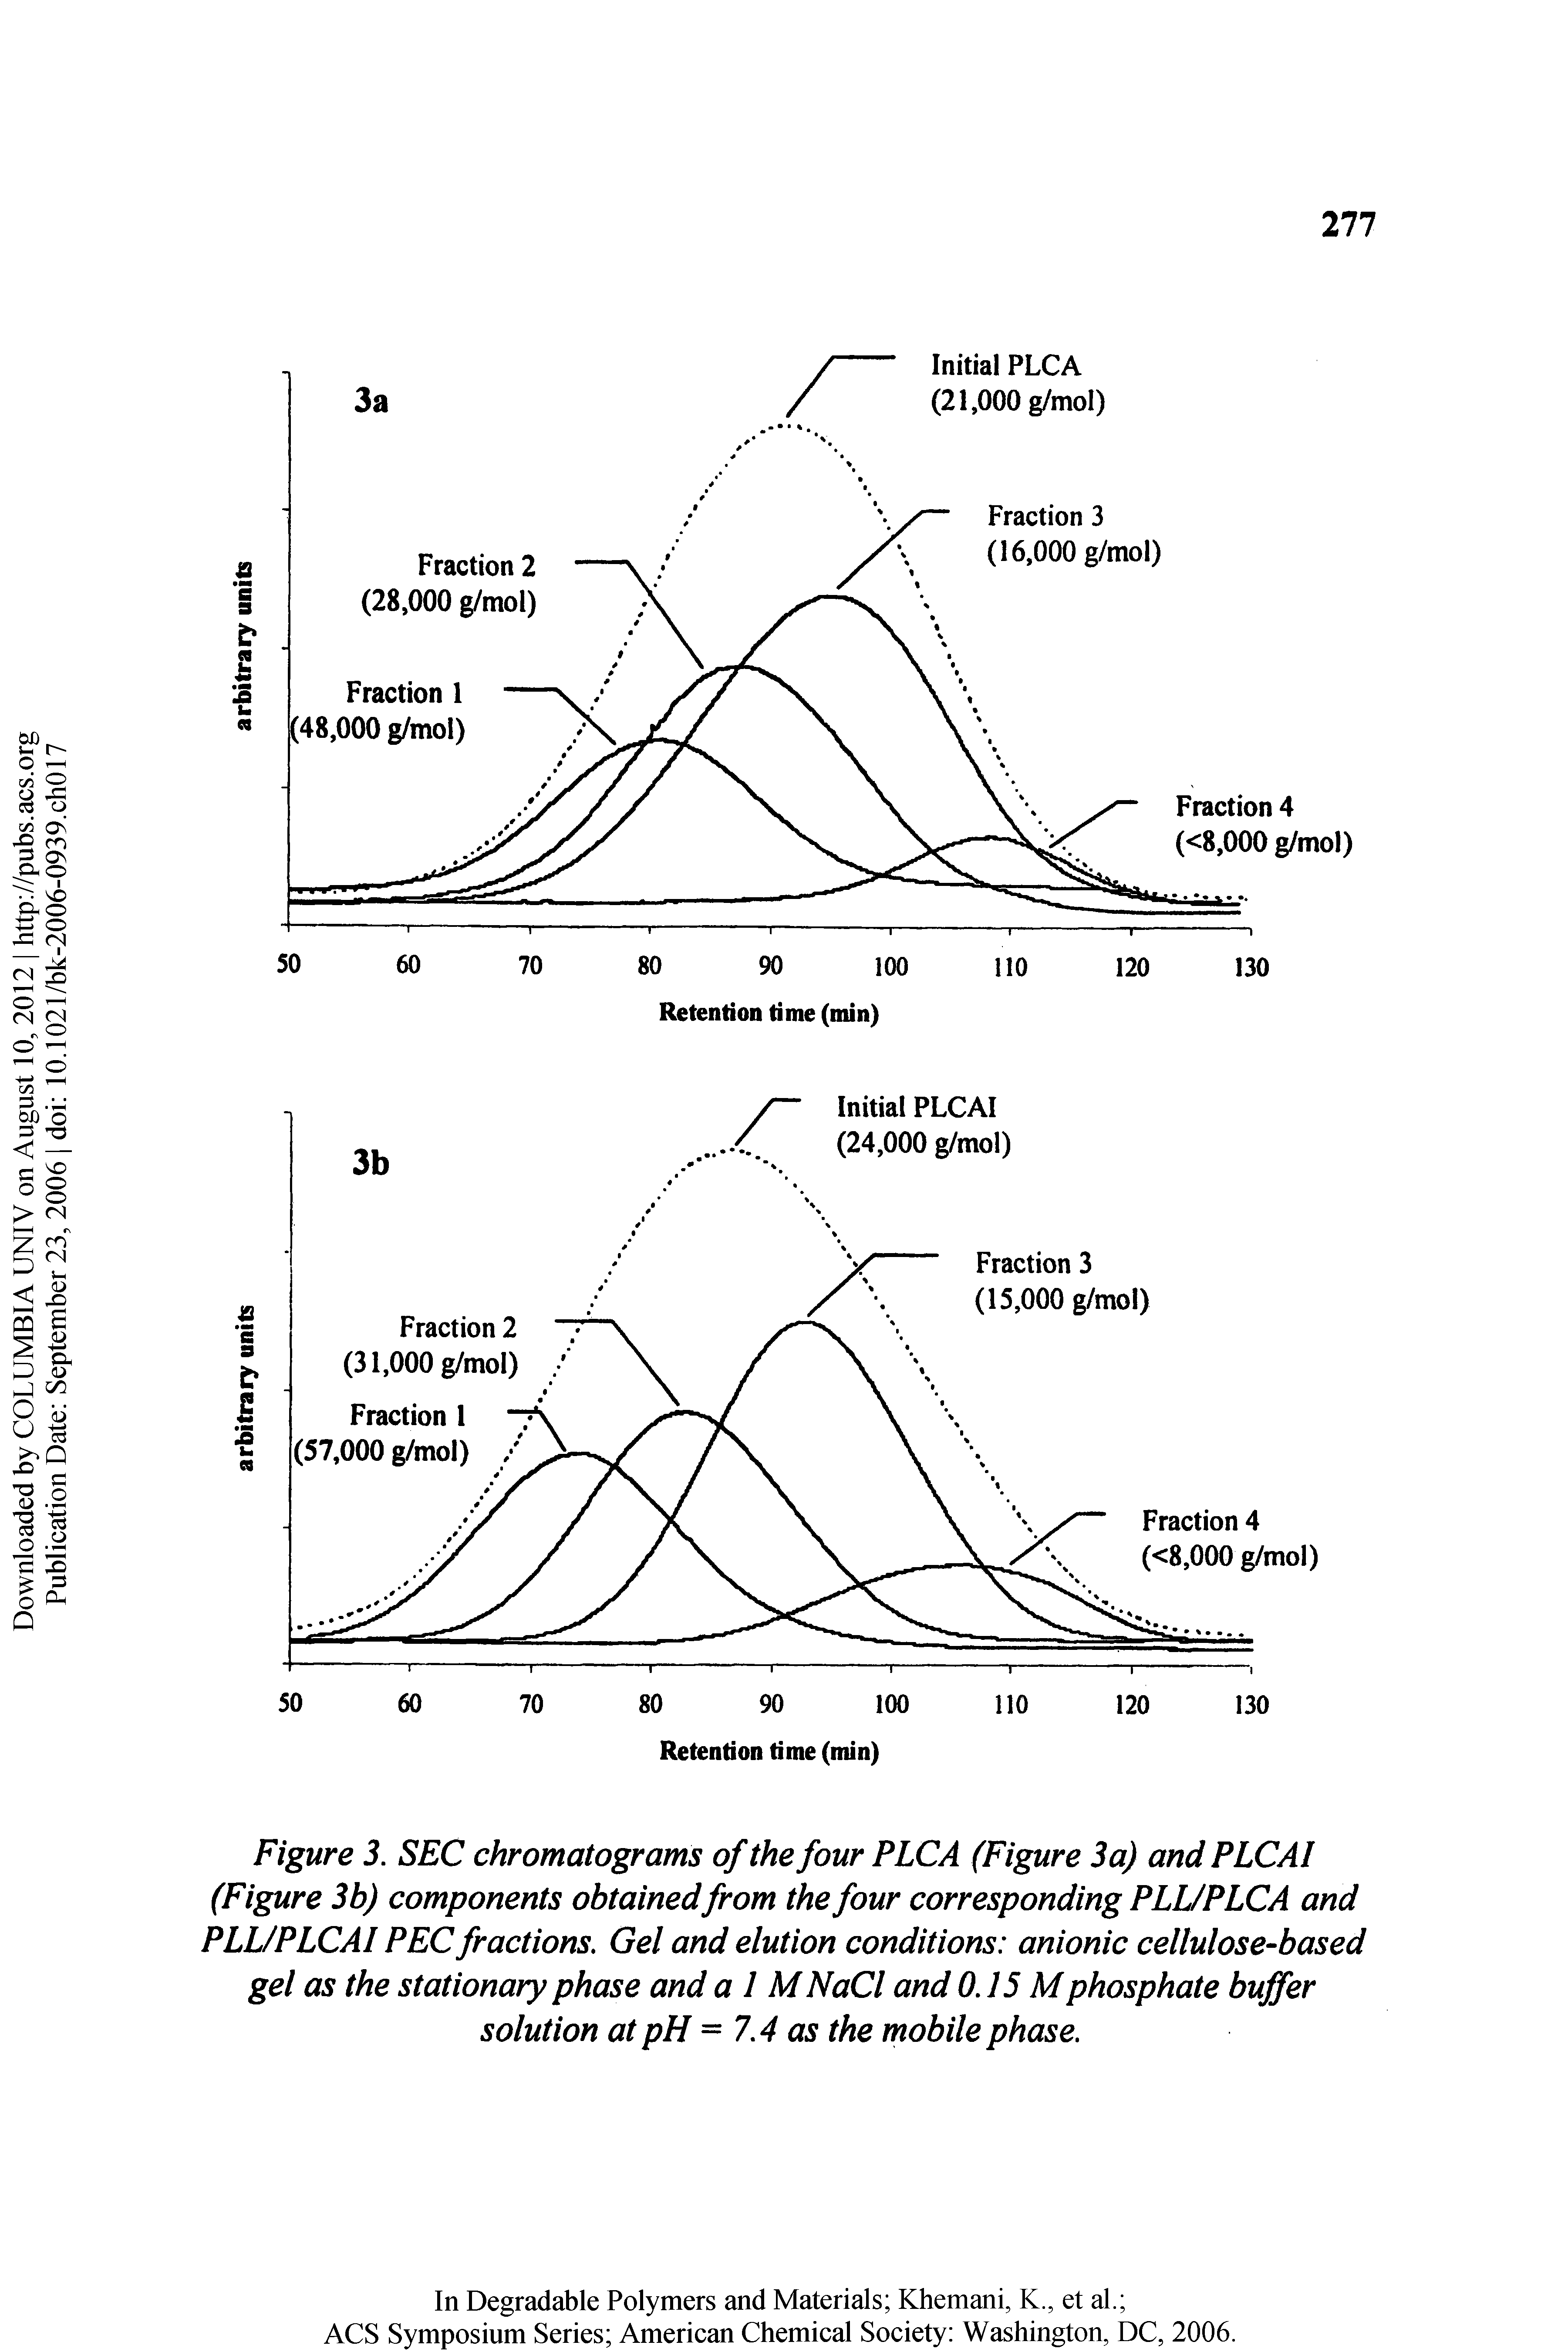 Figure 3. SEC chromatograms of the four PLCA (Figure 3 a) and PLCAI (Figure 3b) components obtained from the four corresponding PLL/PLCA and PLL/PLCAI PEC fractions. Gel and elution conditions anionic cellulose-based gel as the stationary phase and a 1 MNaCl and 0.15 Mphosphate buffer solution at pH =7.4 as the mobile phase.